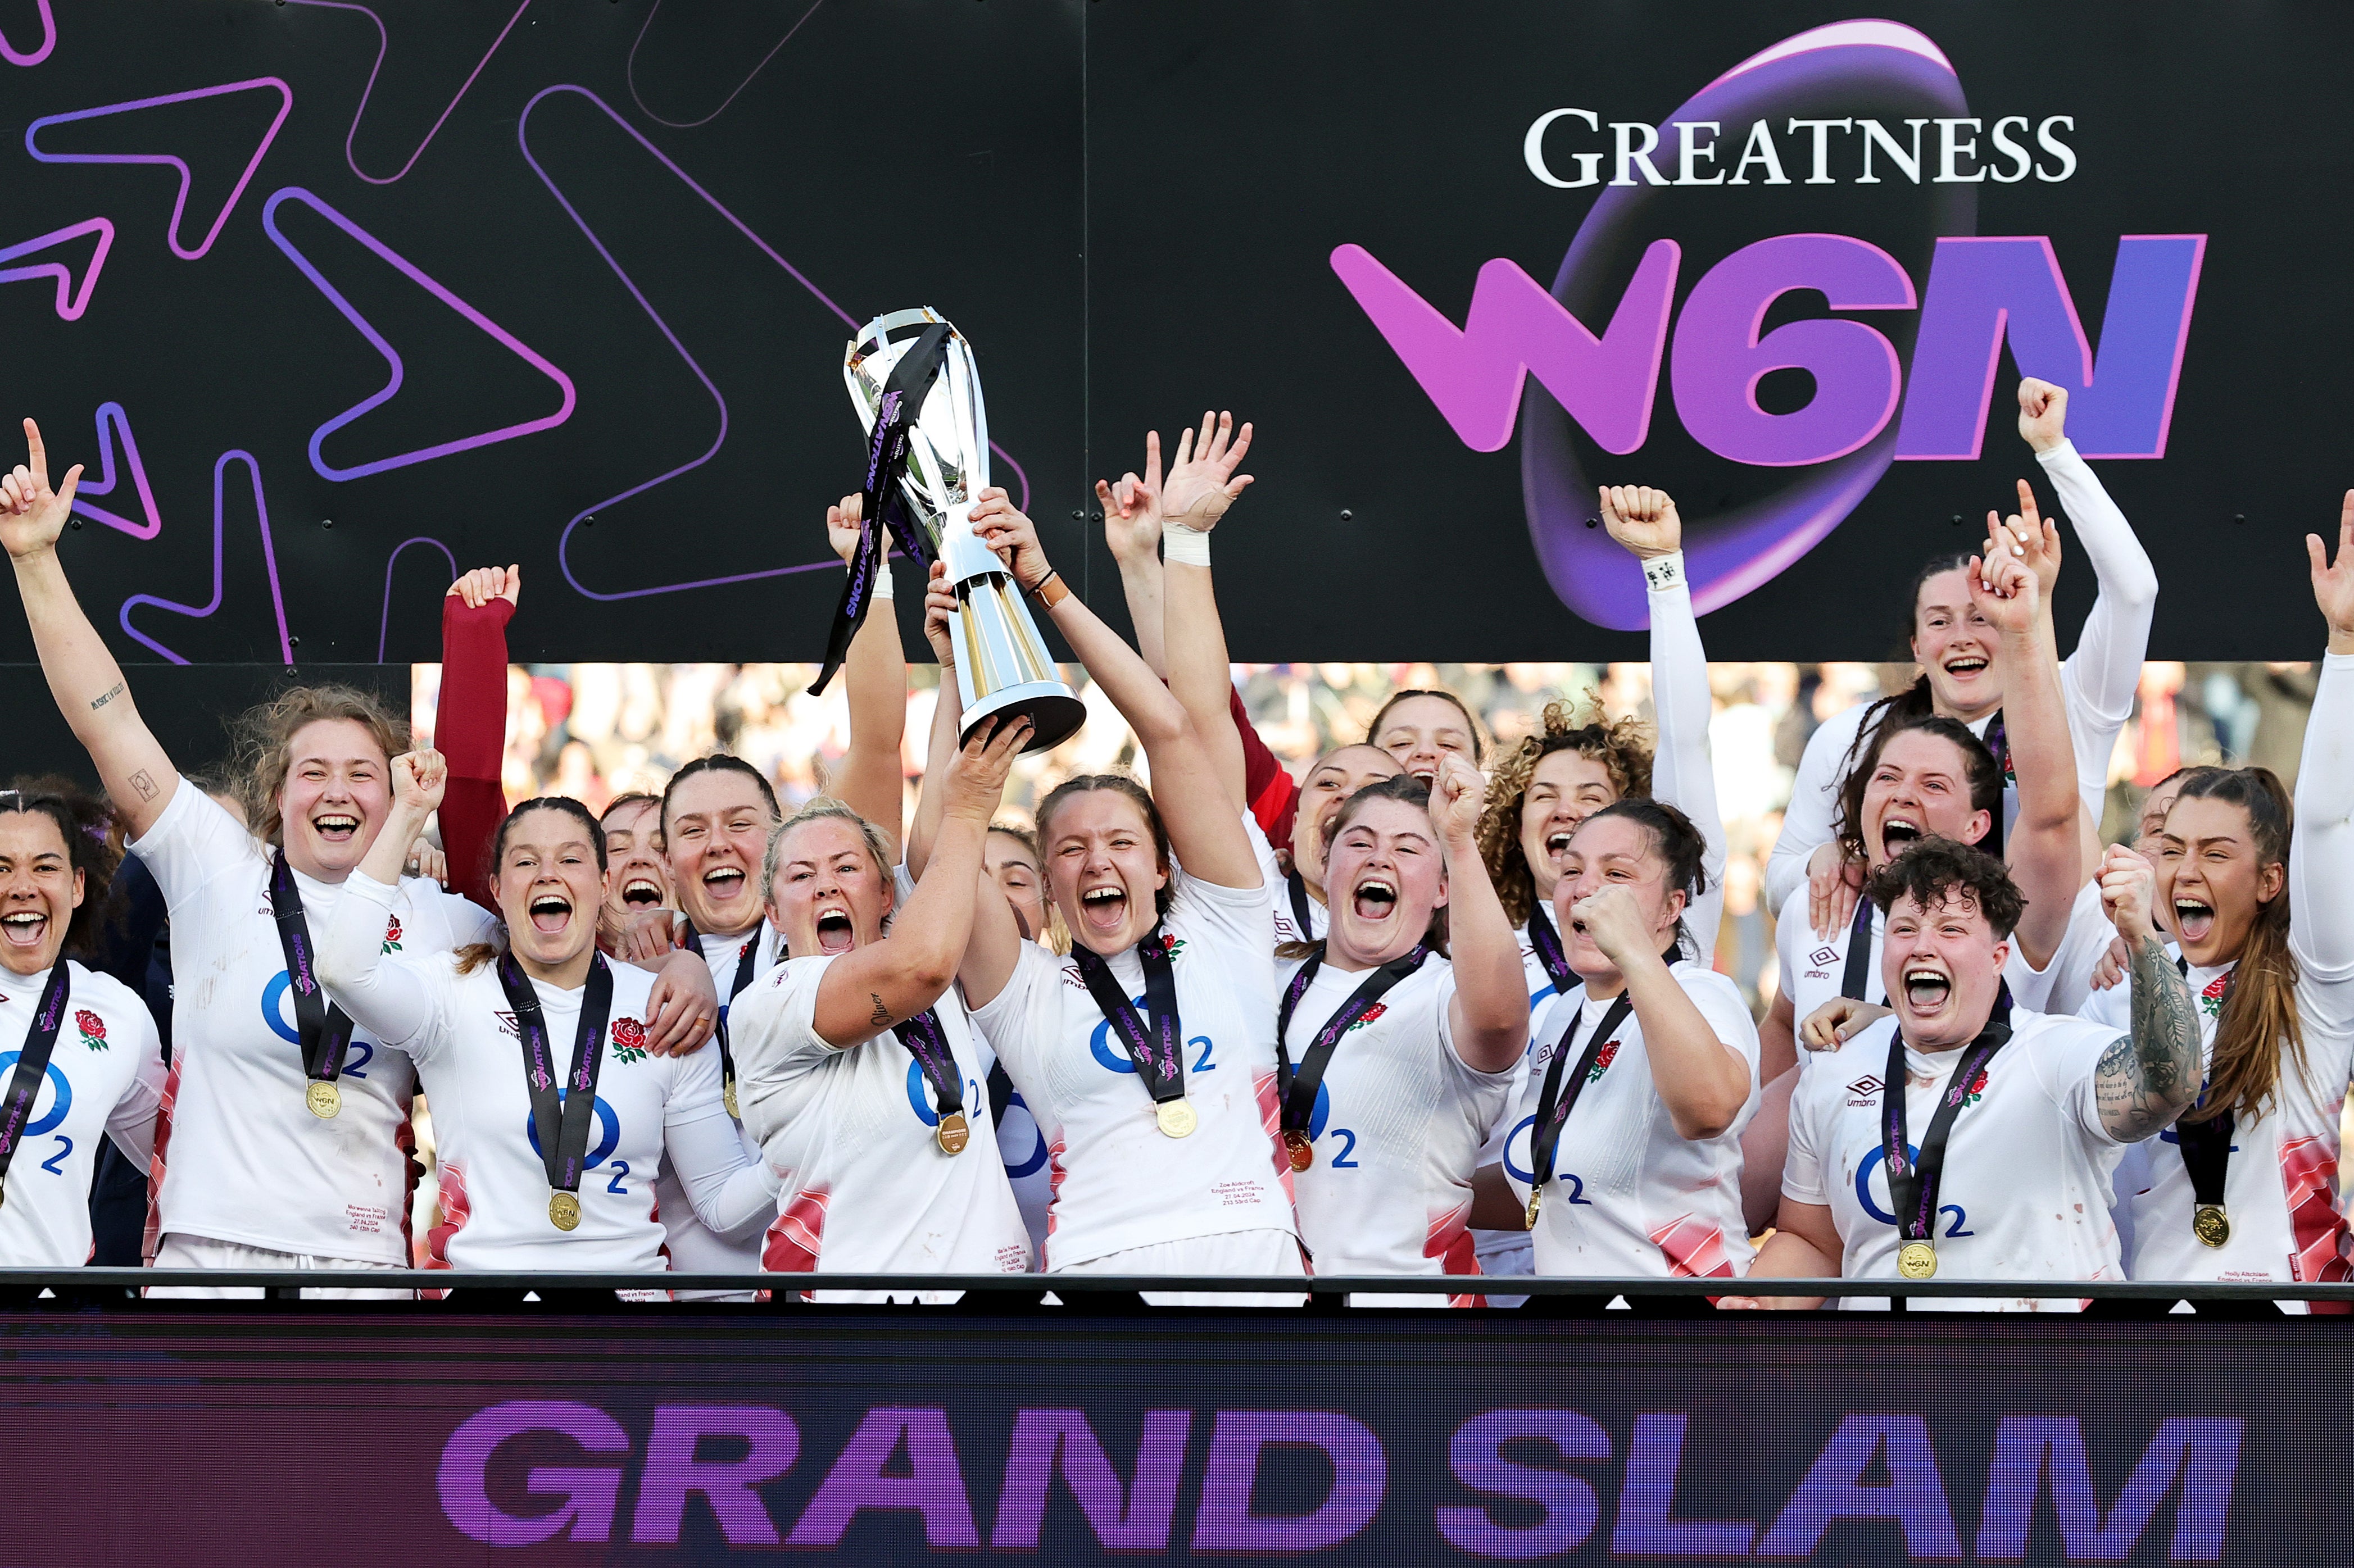 England secured another Women’s Six Nations